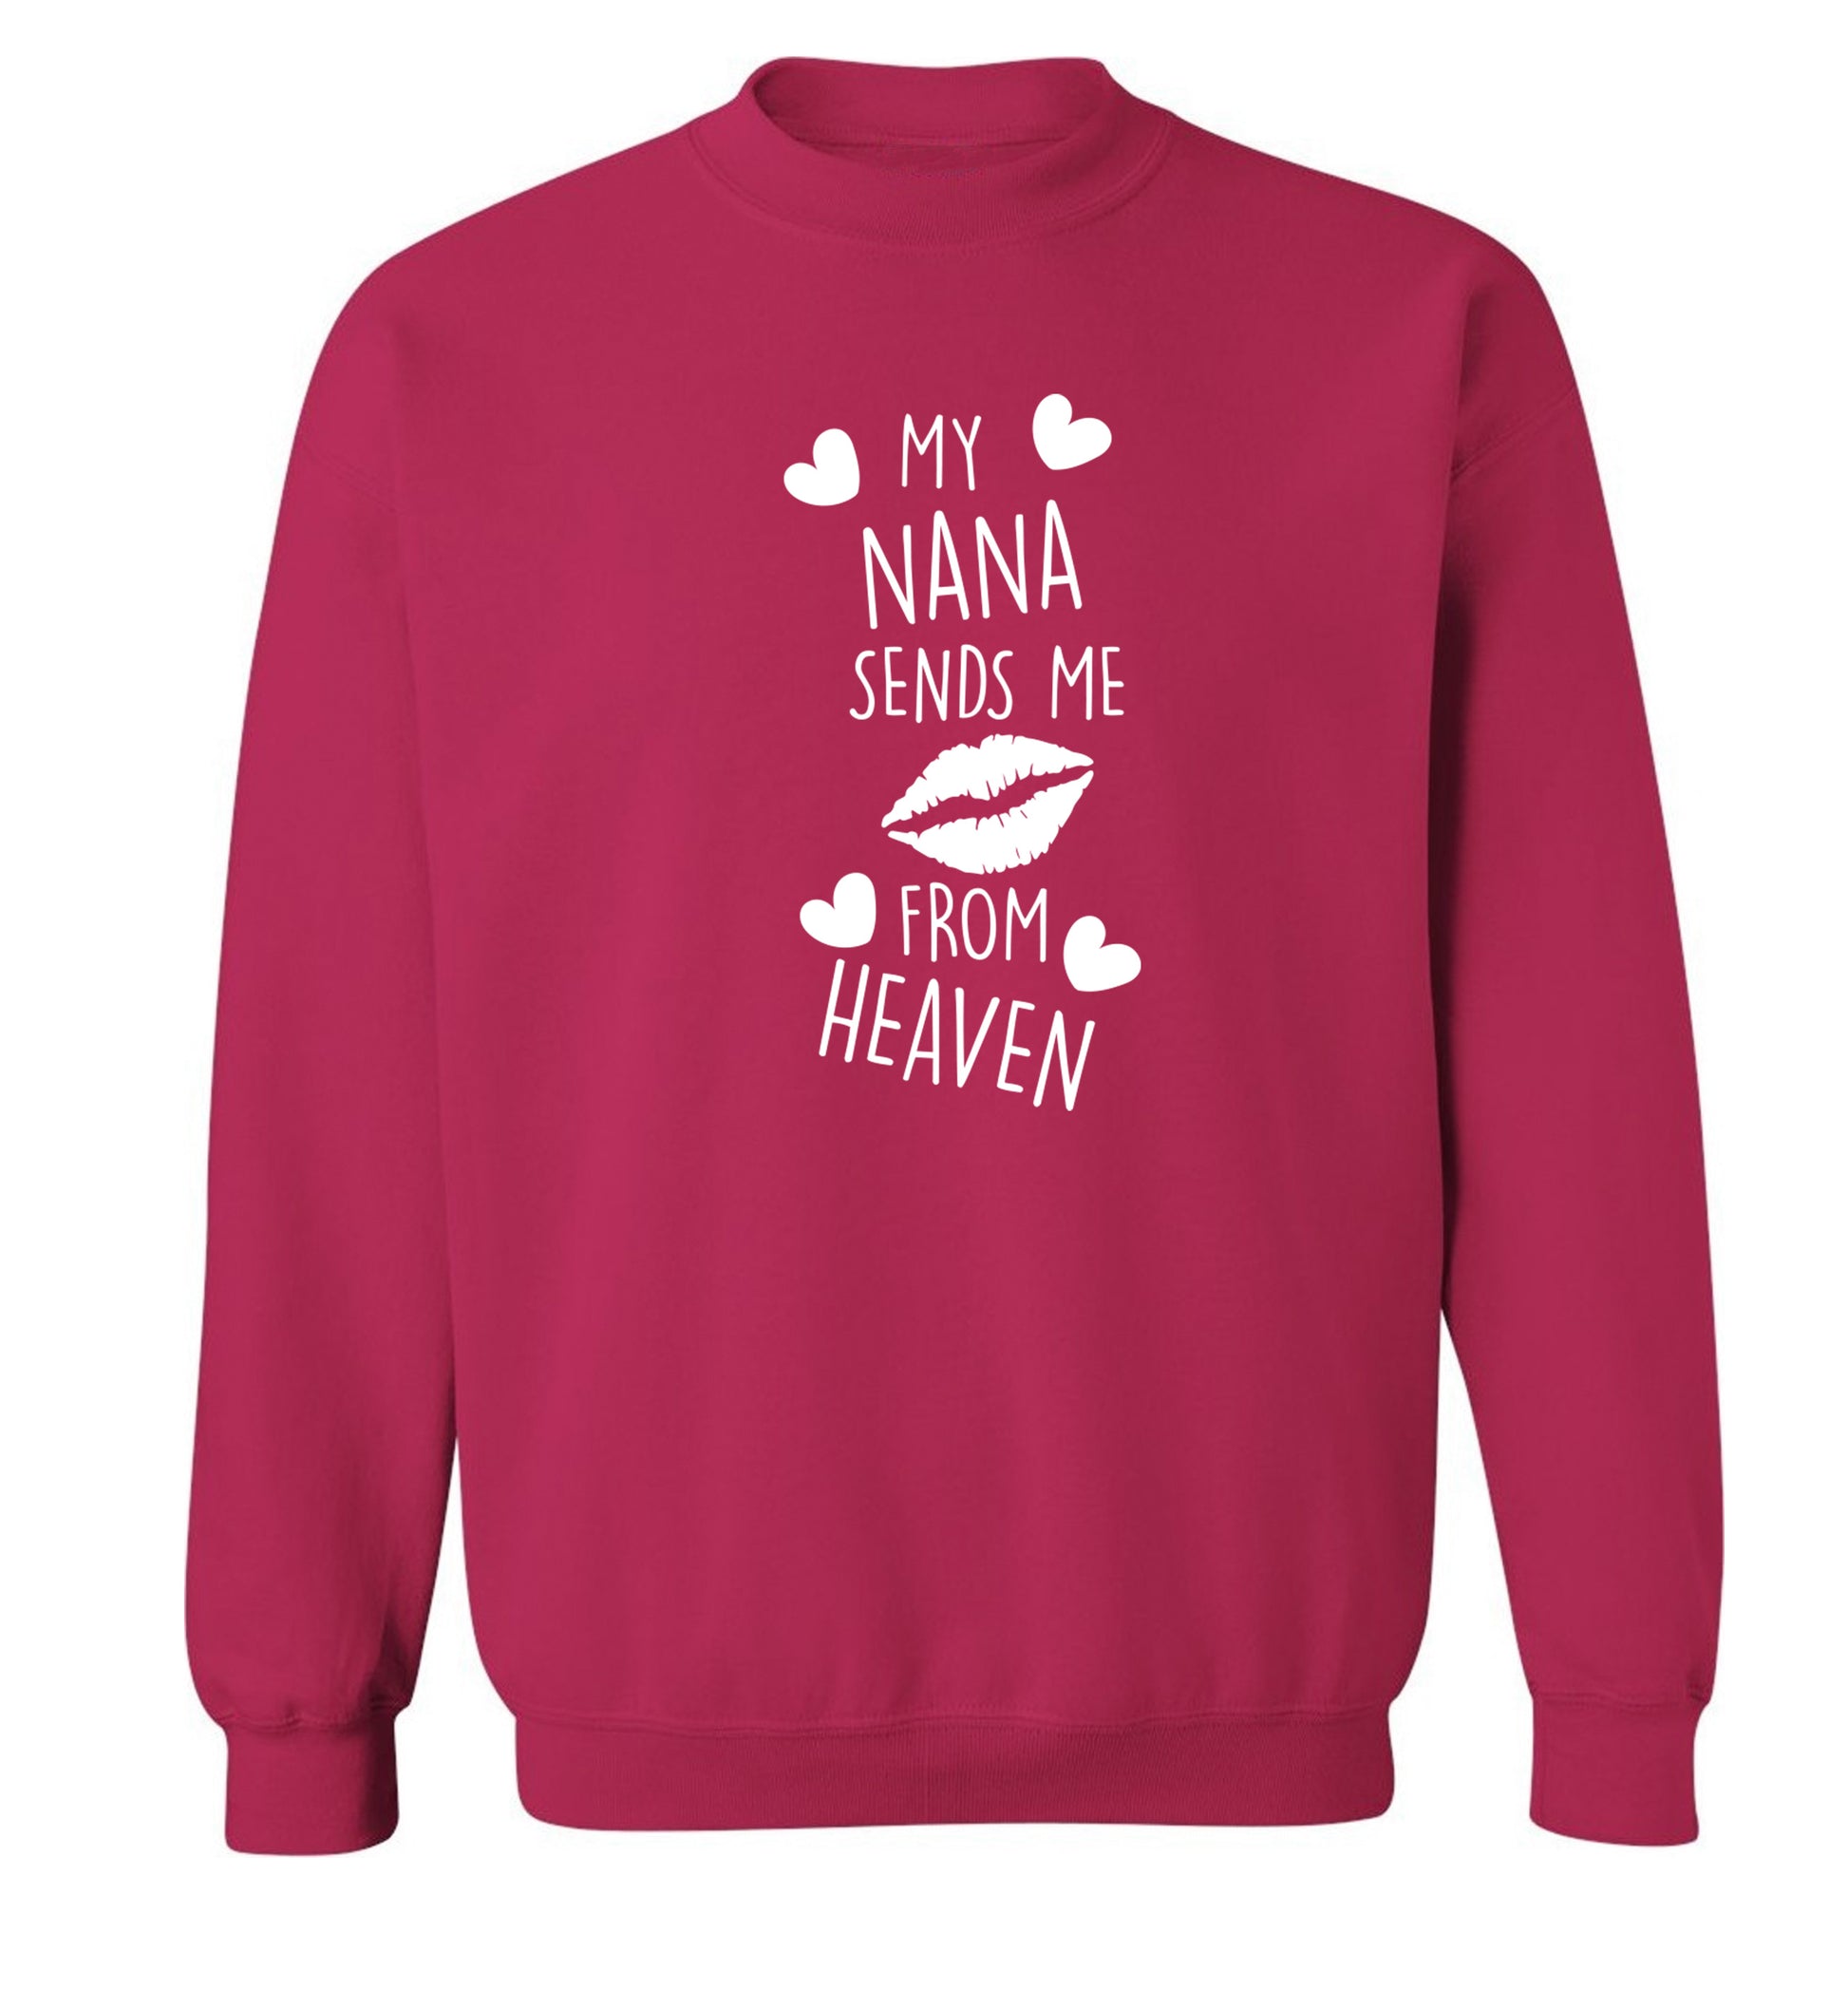 My nana sends me kisses from heaven Adult's unisex pink Sweater 2XL